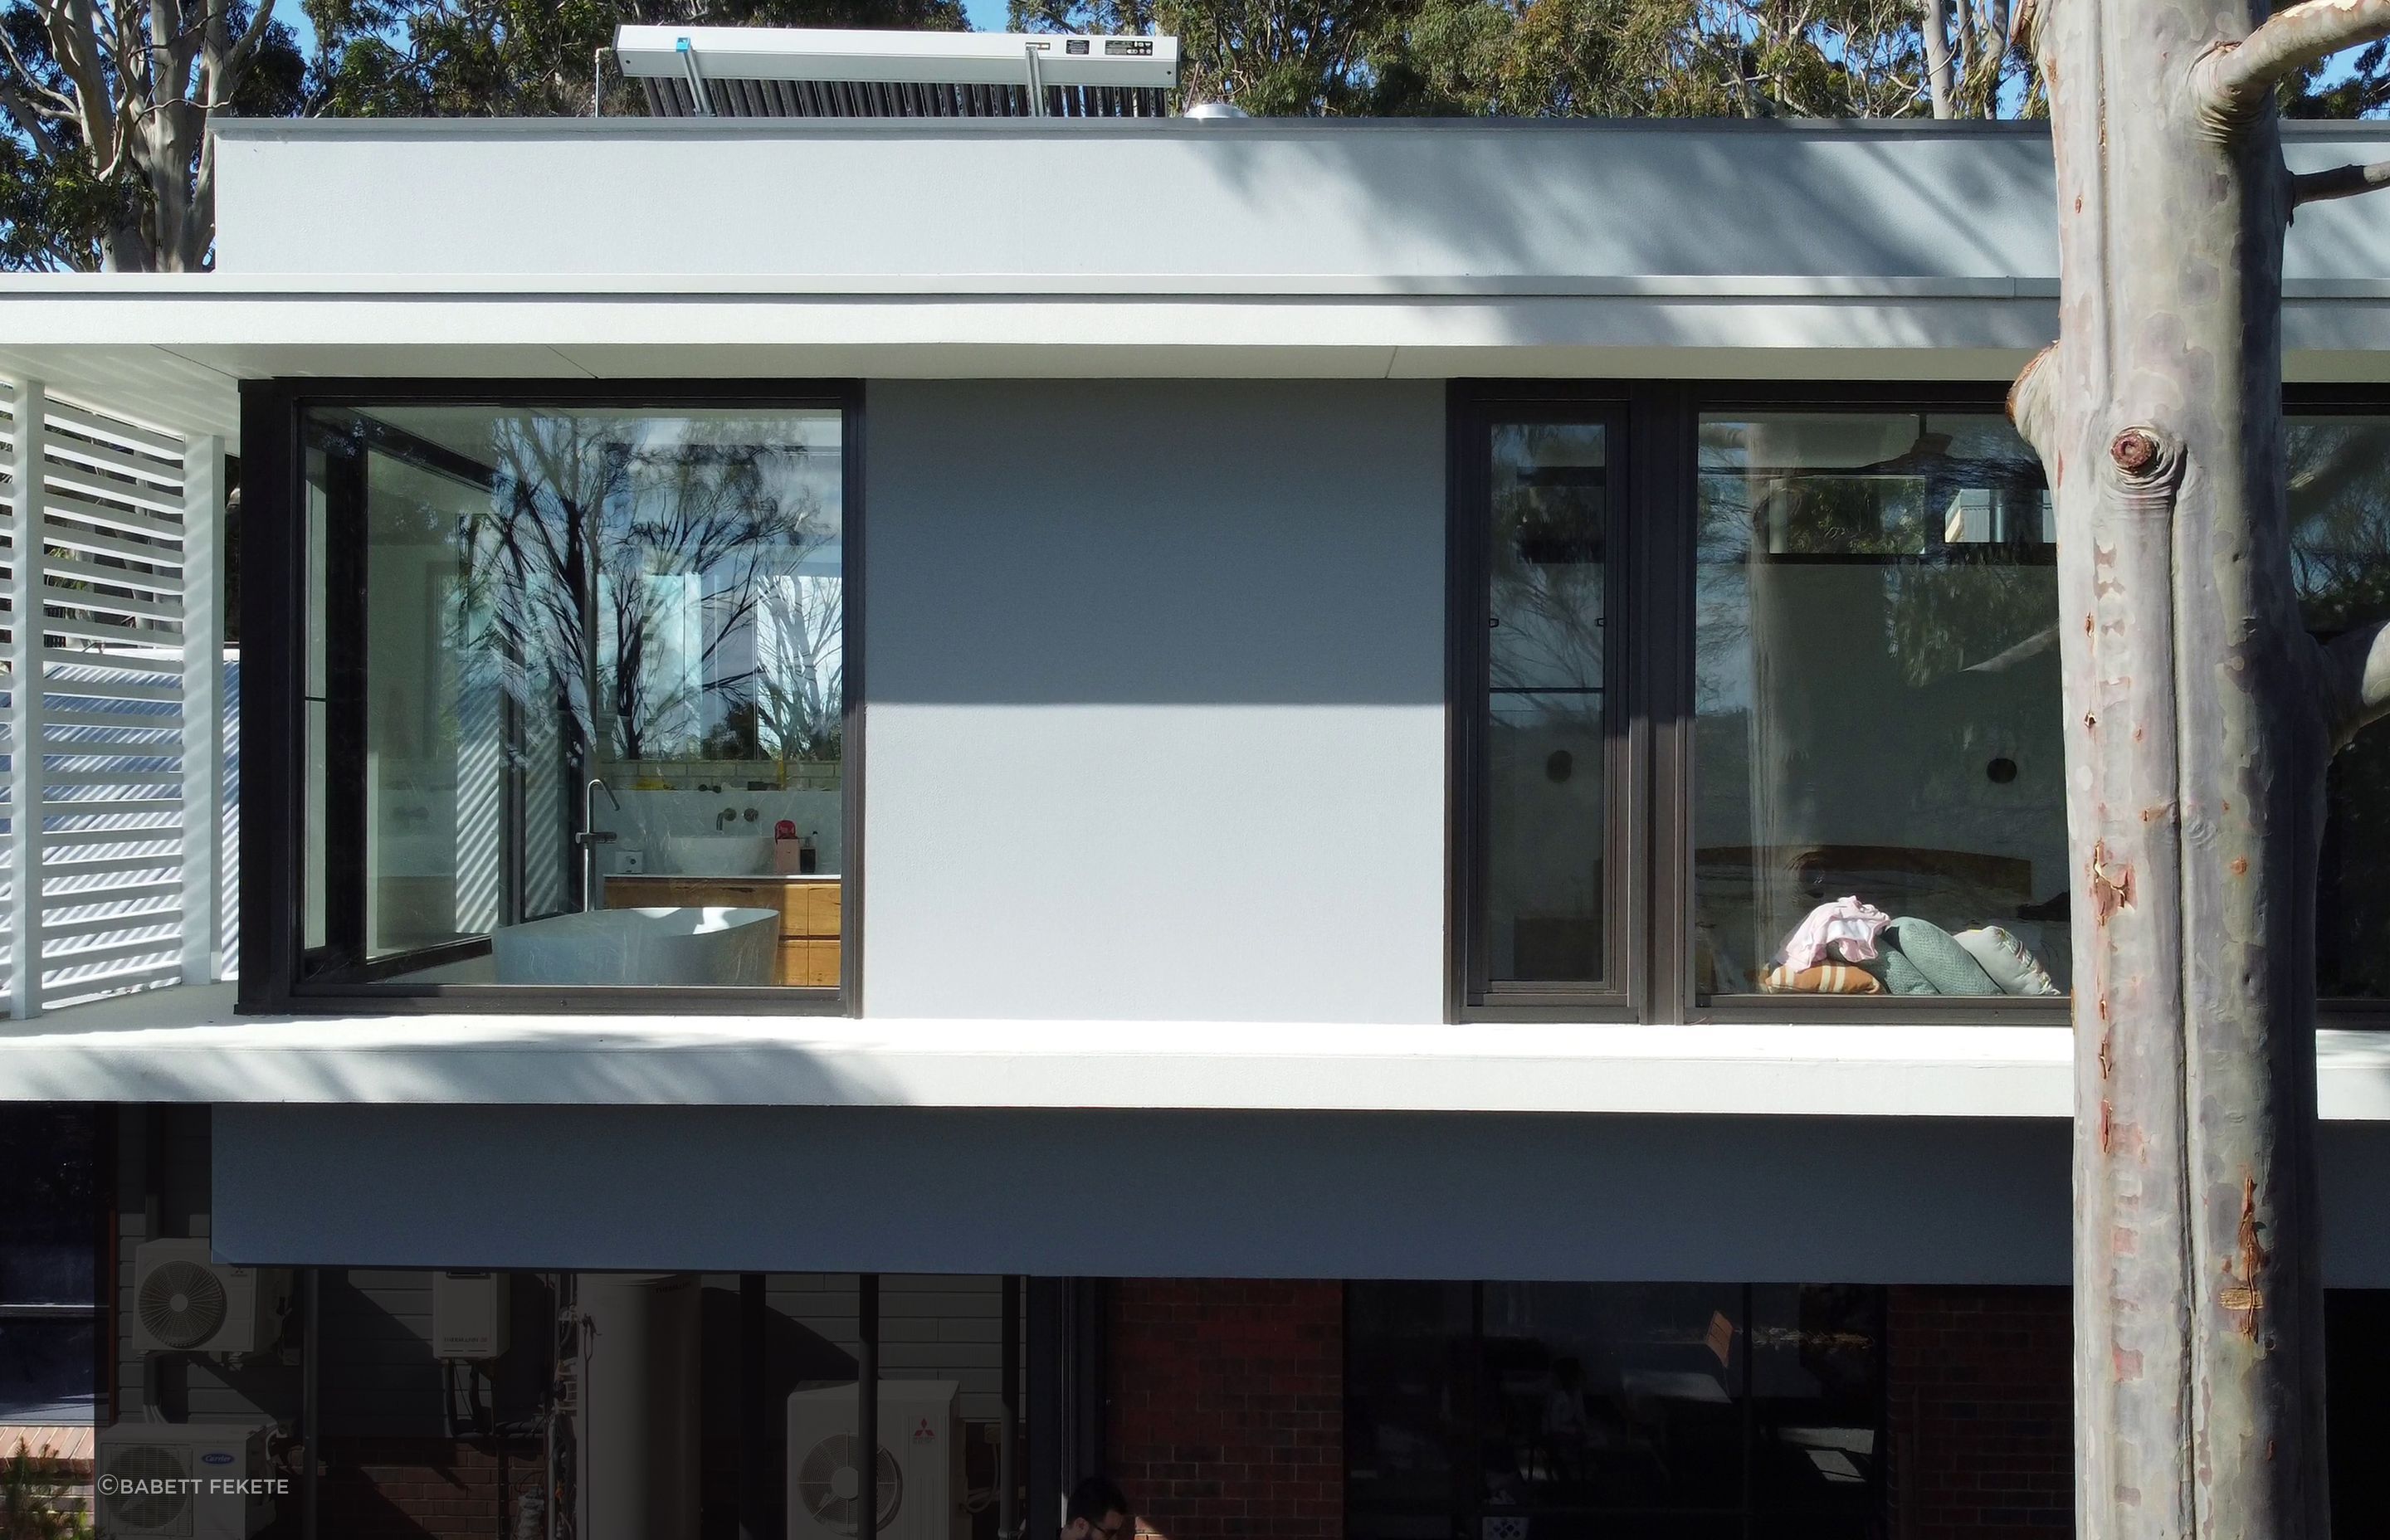 Externally, it’s all steel-framed cladding, expansive windows and a classically minimalistic appeal.